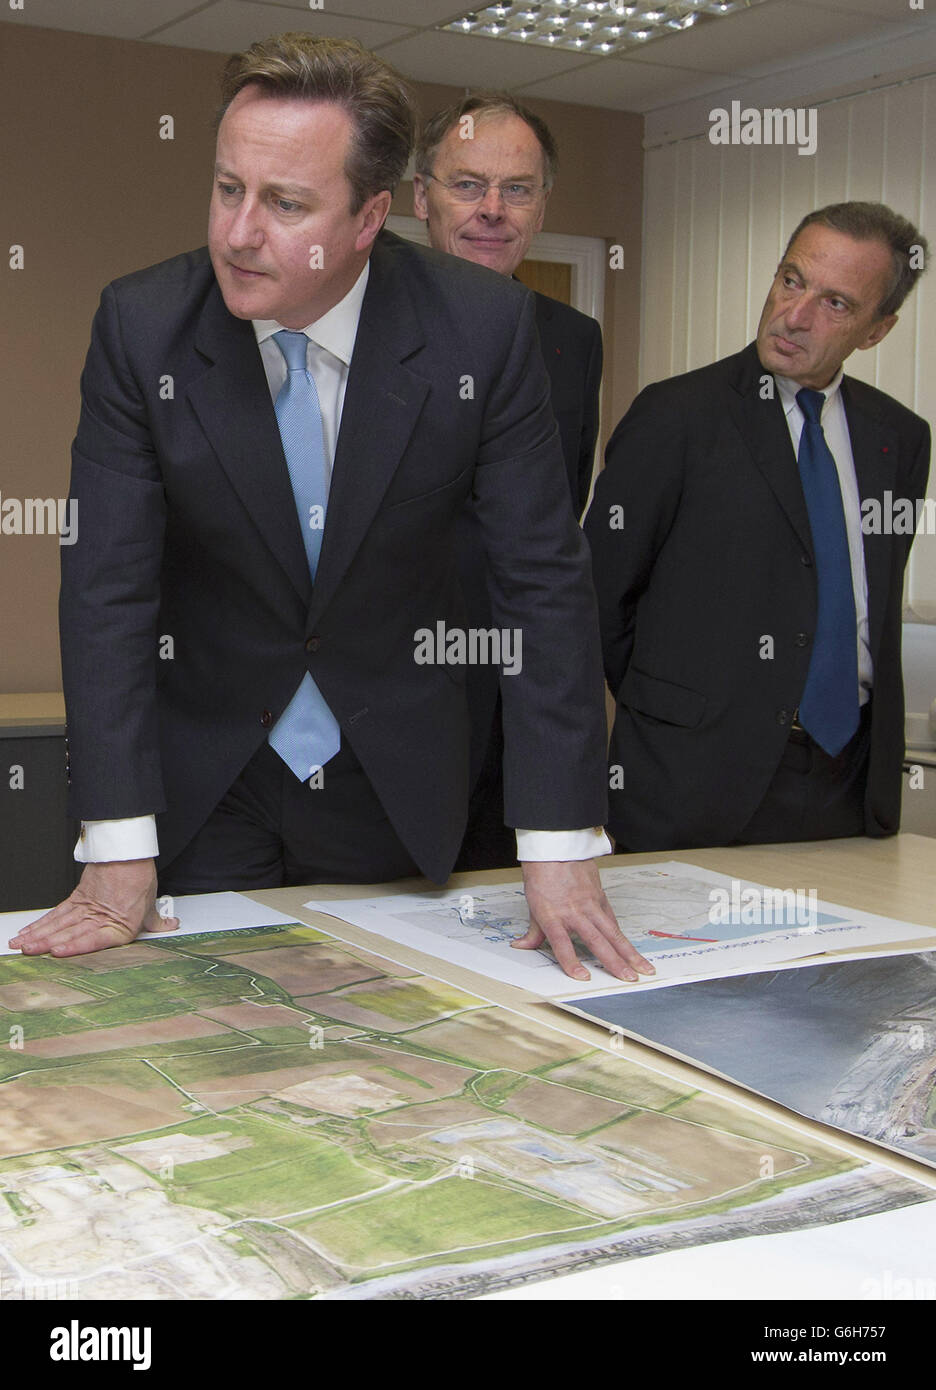 Prime Minister David Cameron with , Vincent de Rivaz, Chief Executive of EDF (Electricite de France) and Henri Proglio, CEO and Chairman of EDF (right) as they examine site plans for the news Hinkly C nuclear power station at Hinkley Point, Somerset. Britain's first new nuclear power station in a generation is to be built under the &Acirc;&pound;16 billion project which will create thousands of new jobs. Stock Photo